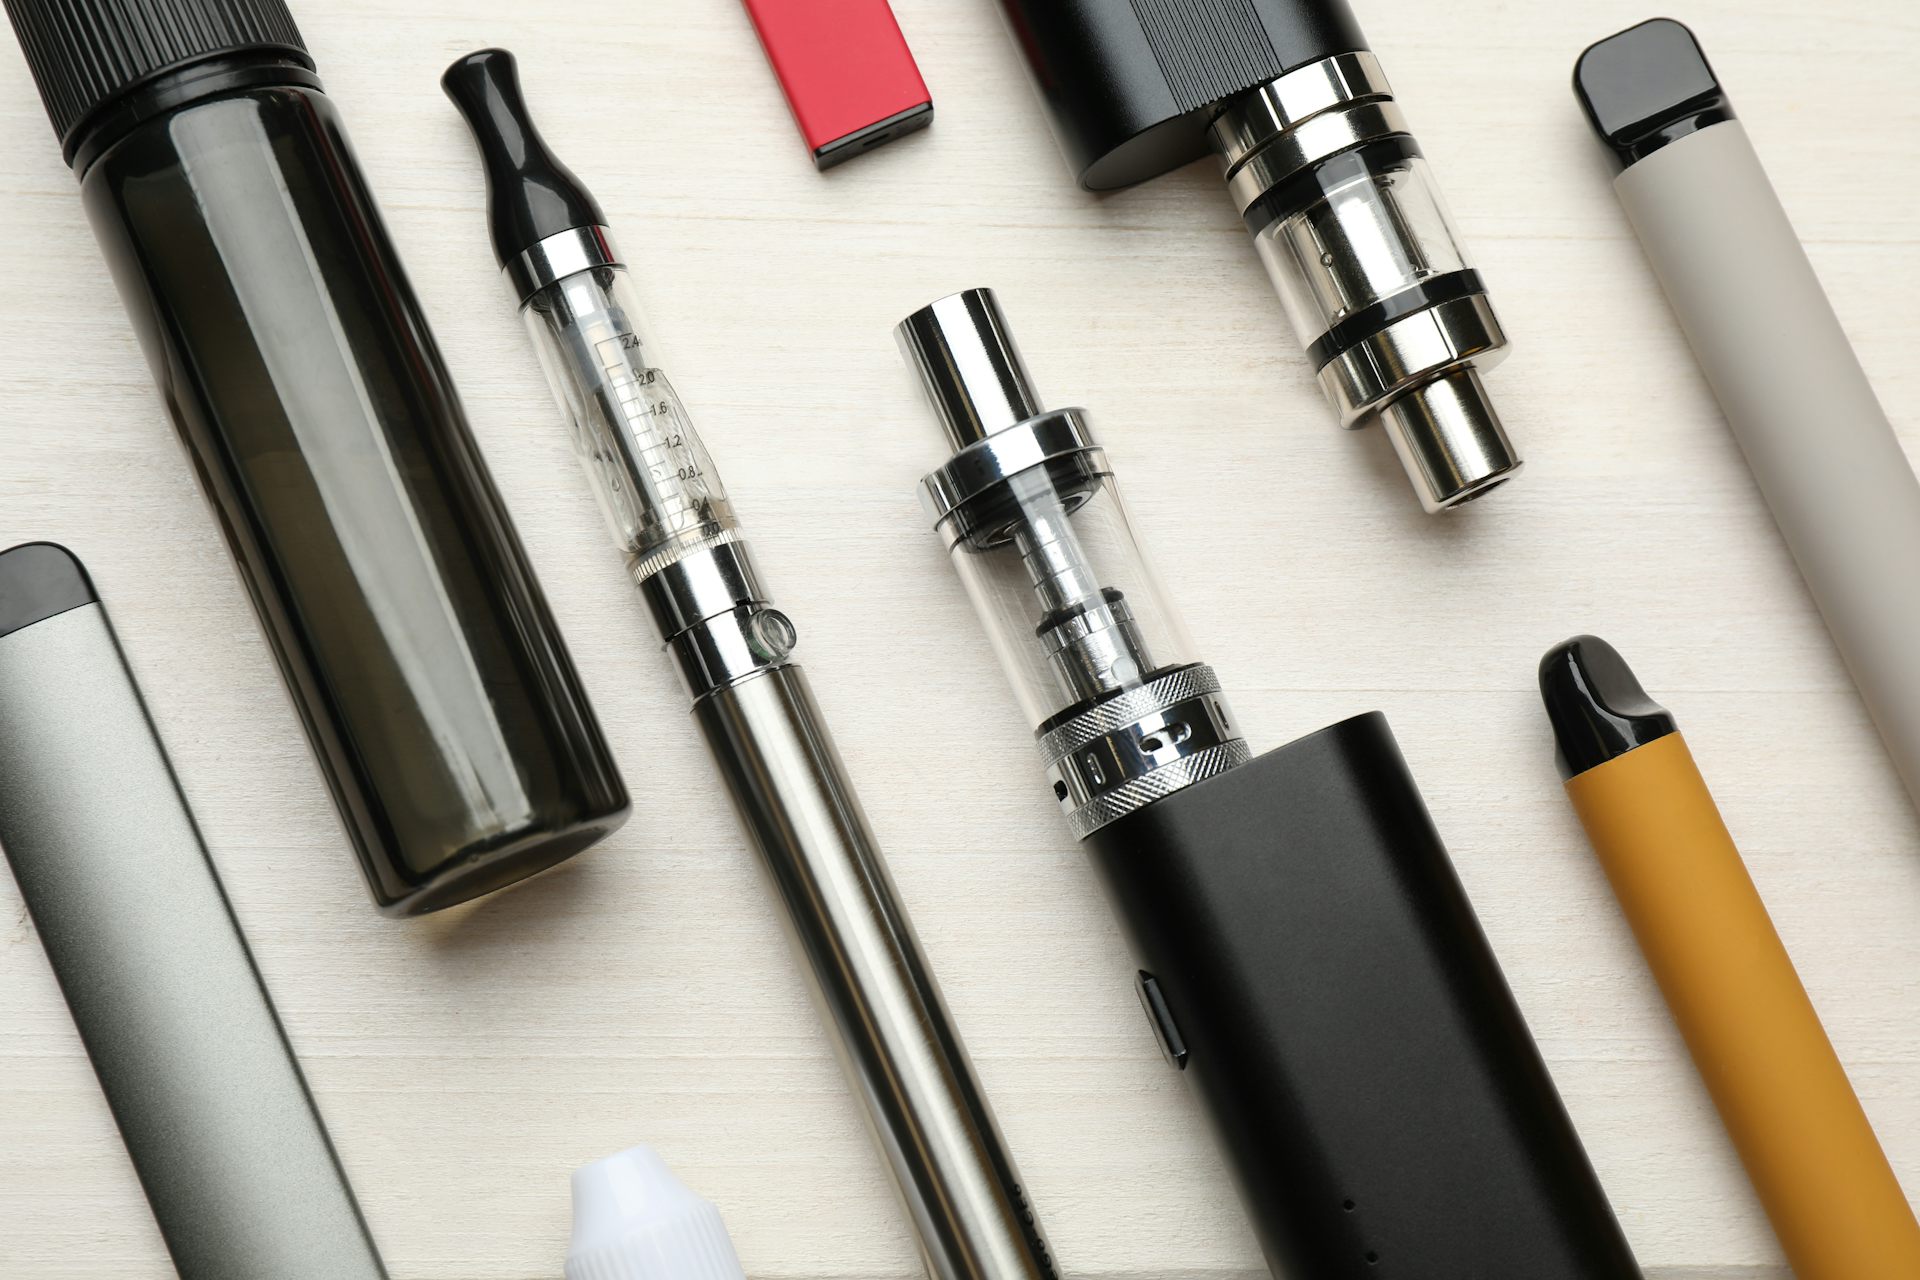 FDA Authorized the Sale of Menthol-Flavored E-Cigarettes – a Health Policy Expert Explains How the Benefits May Outweigh the Risks